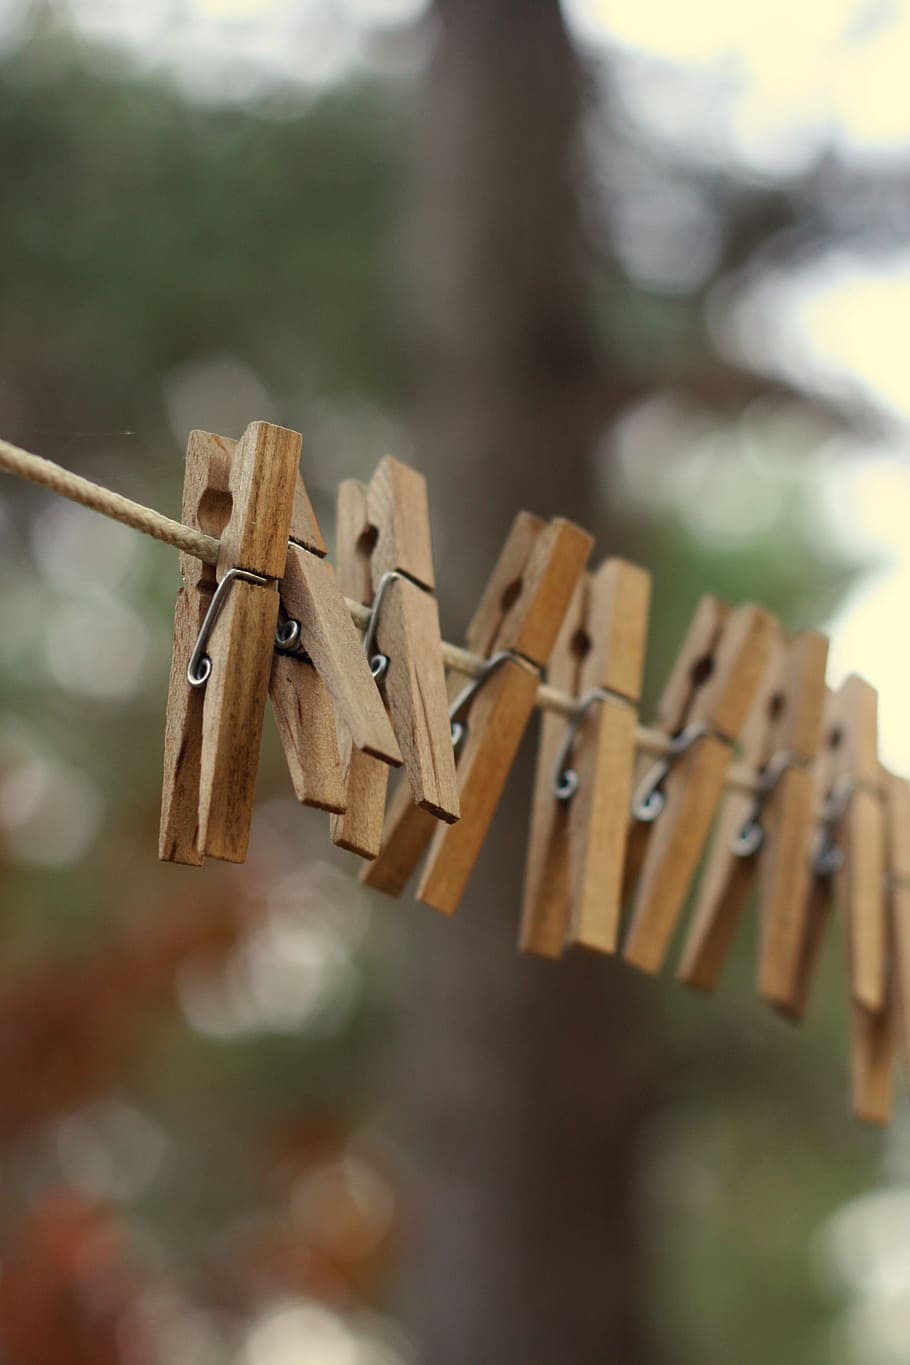 clothesline, clothespin, rustic, laundry, line, dry, hang, rope, housework, clean